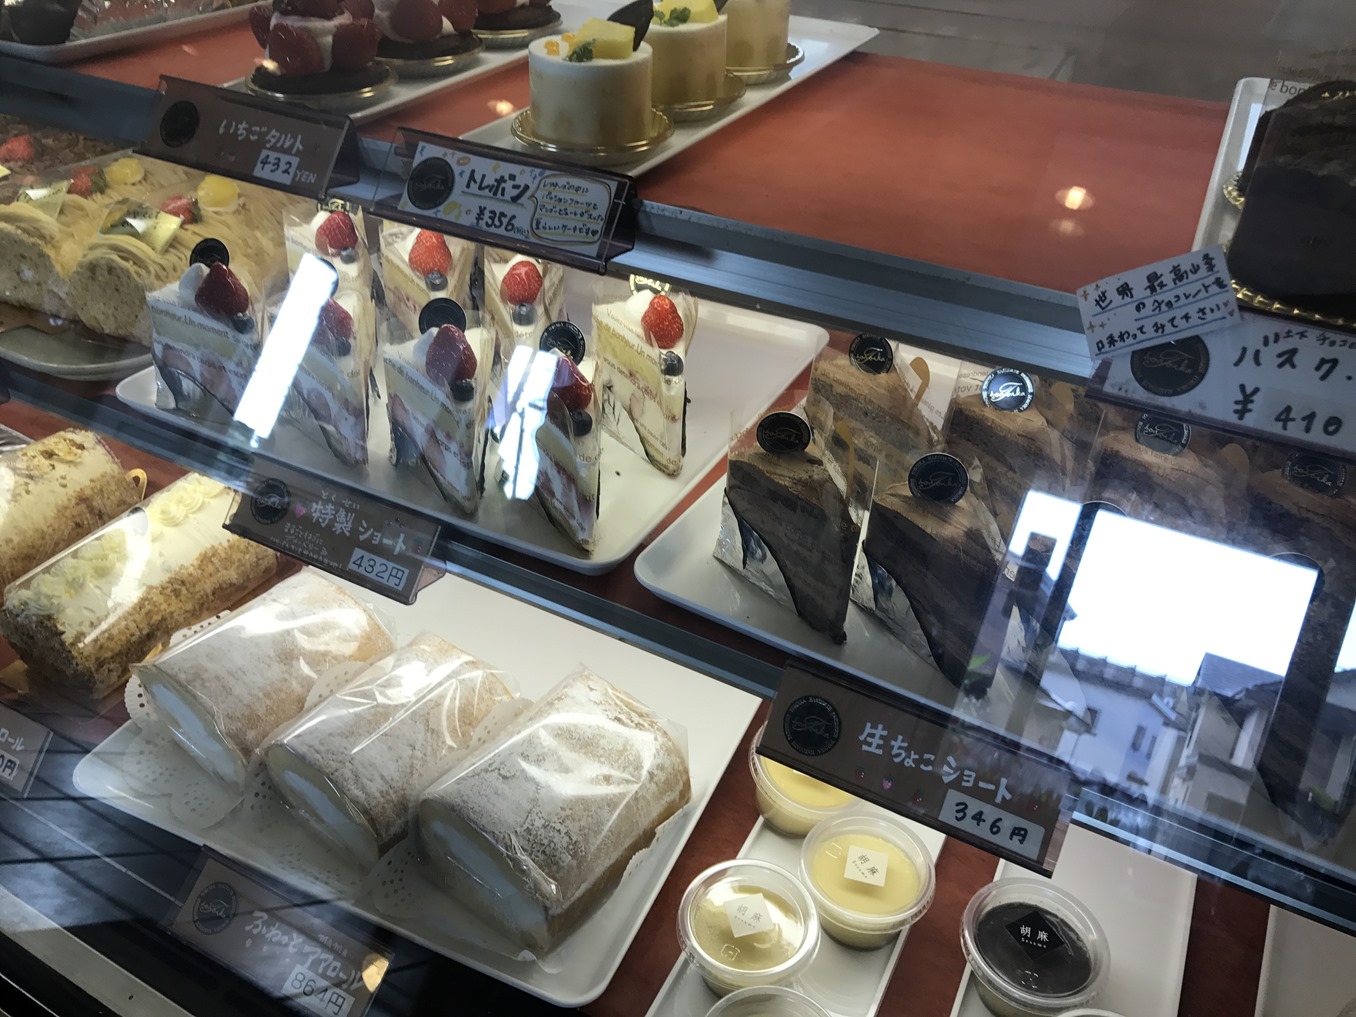 Cafe Bread Toroika トロイカ洋菓子店のカフェ 函館の飲み食い日記 Powered By ライブドアブログ